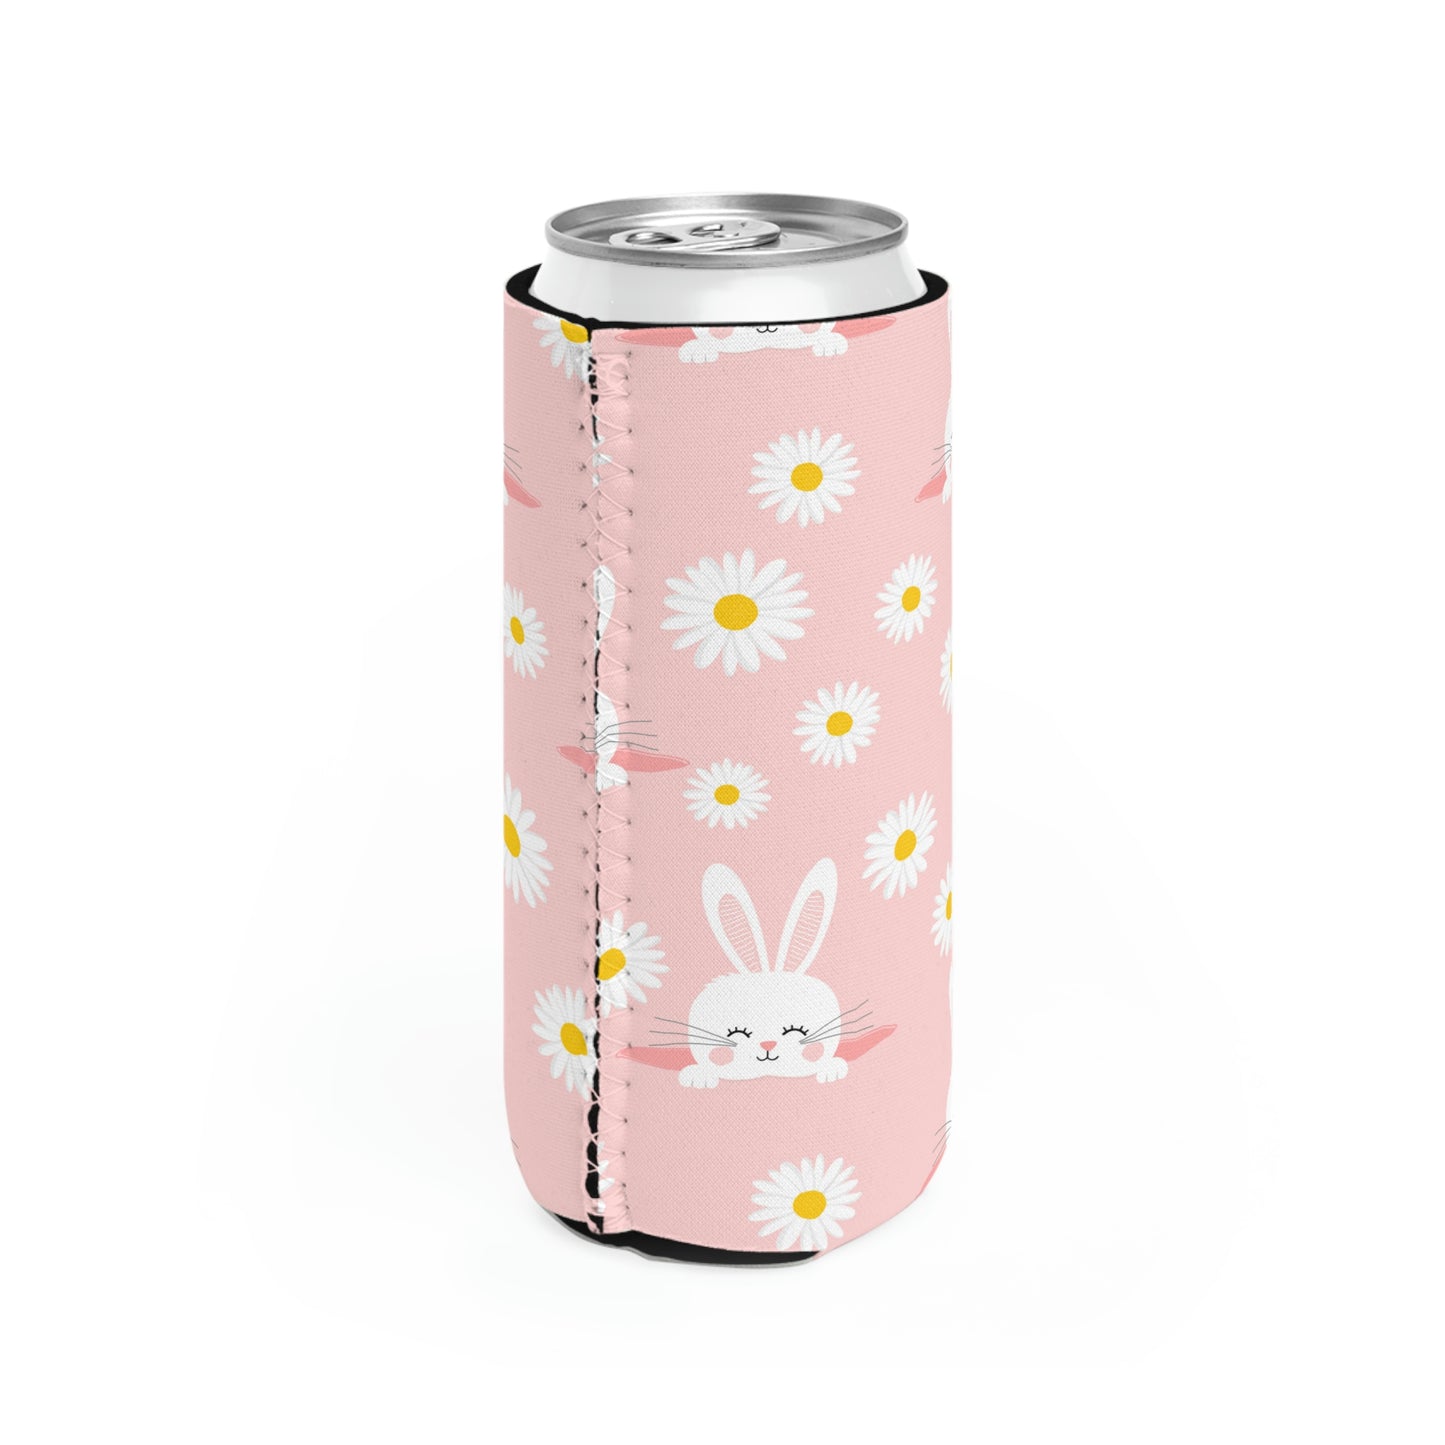 Smiling Bunnies and Daisies Slim Can Cooler